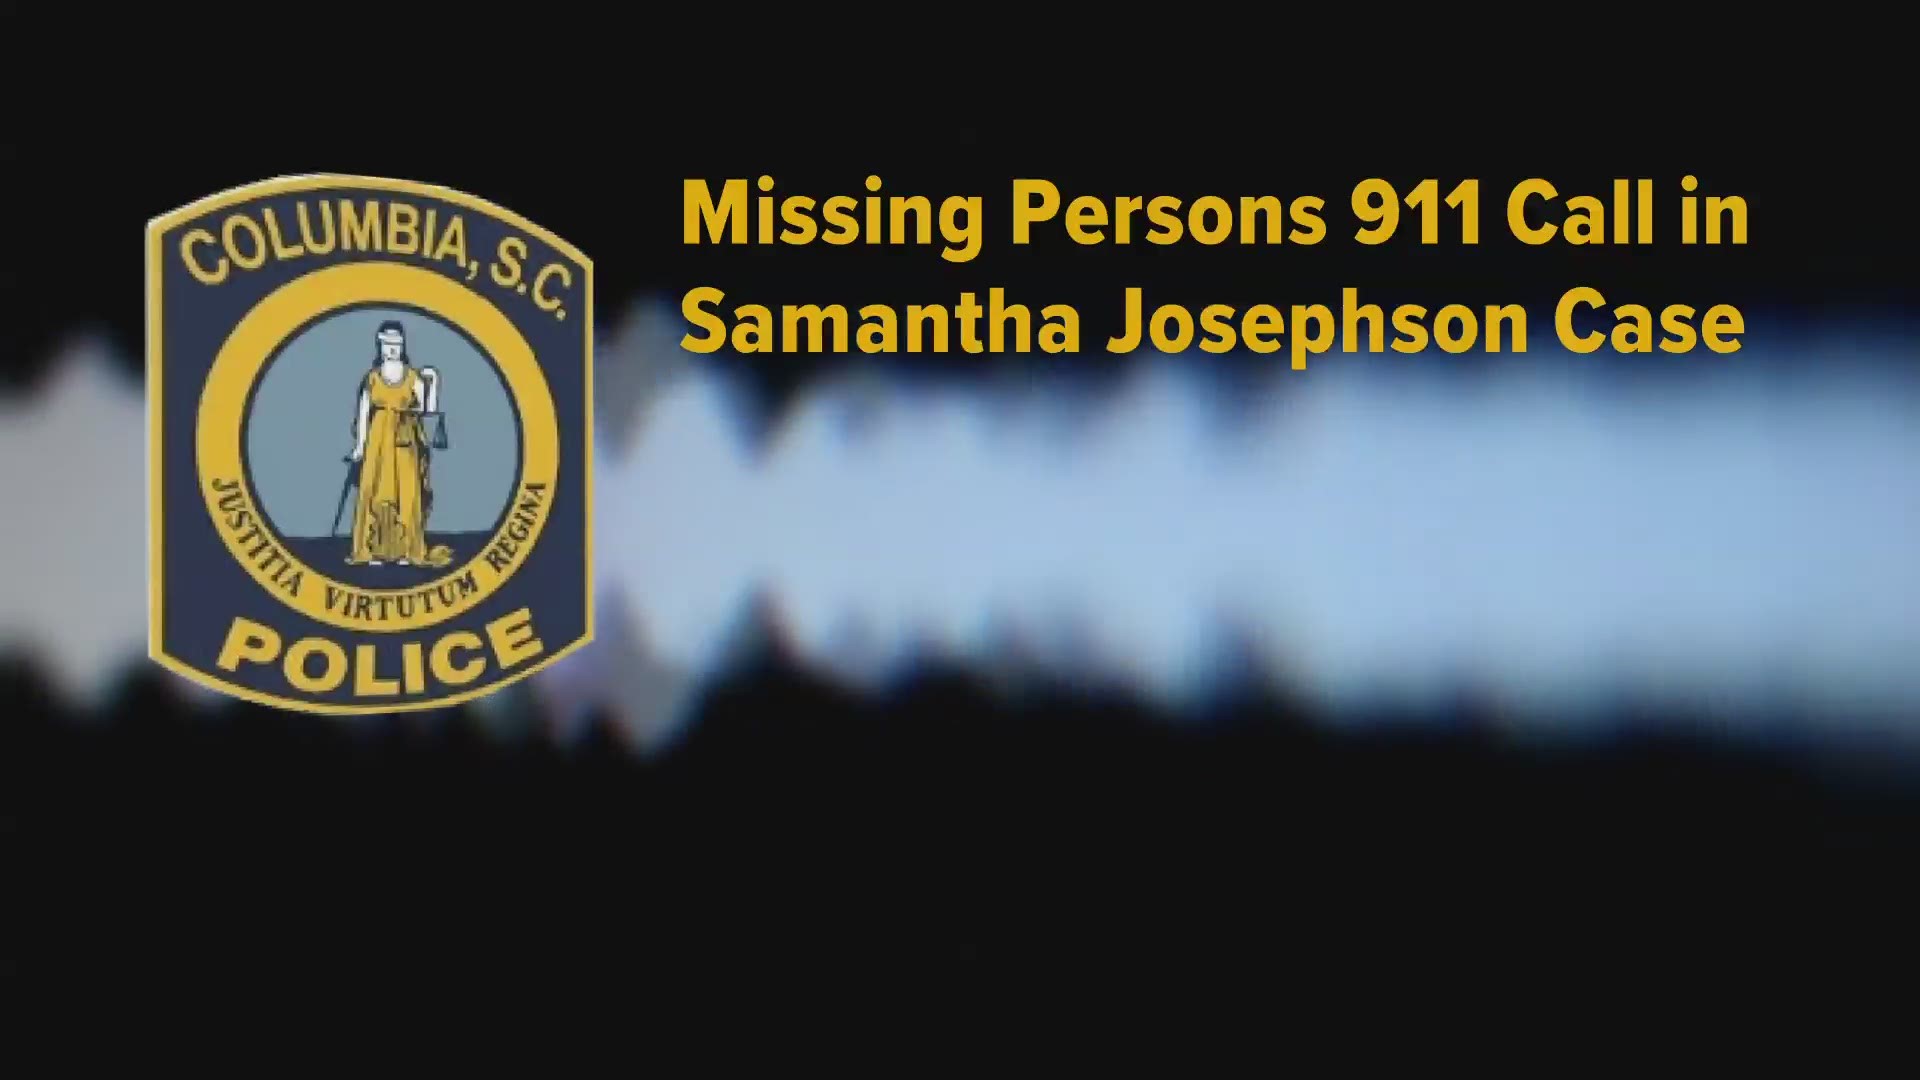 After 21-year-old Samantha Josephson went missing on March 29, 2019, her roommate called 911 and filed a missing persons report.